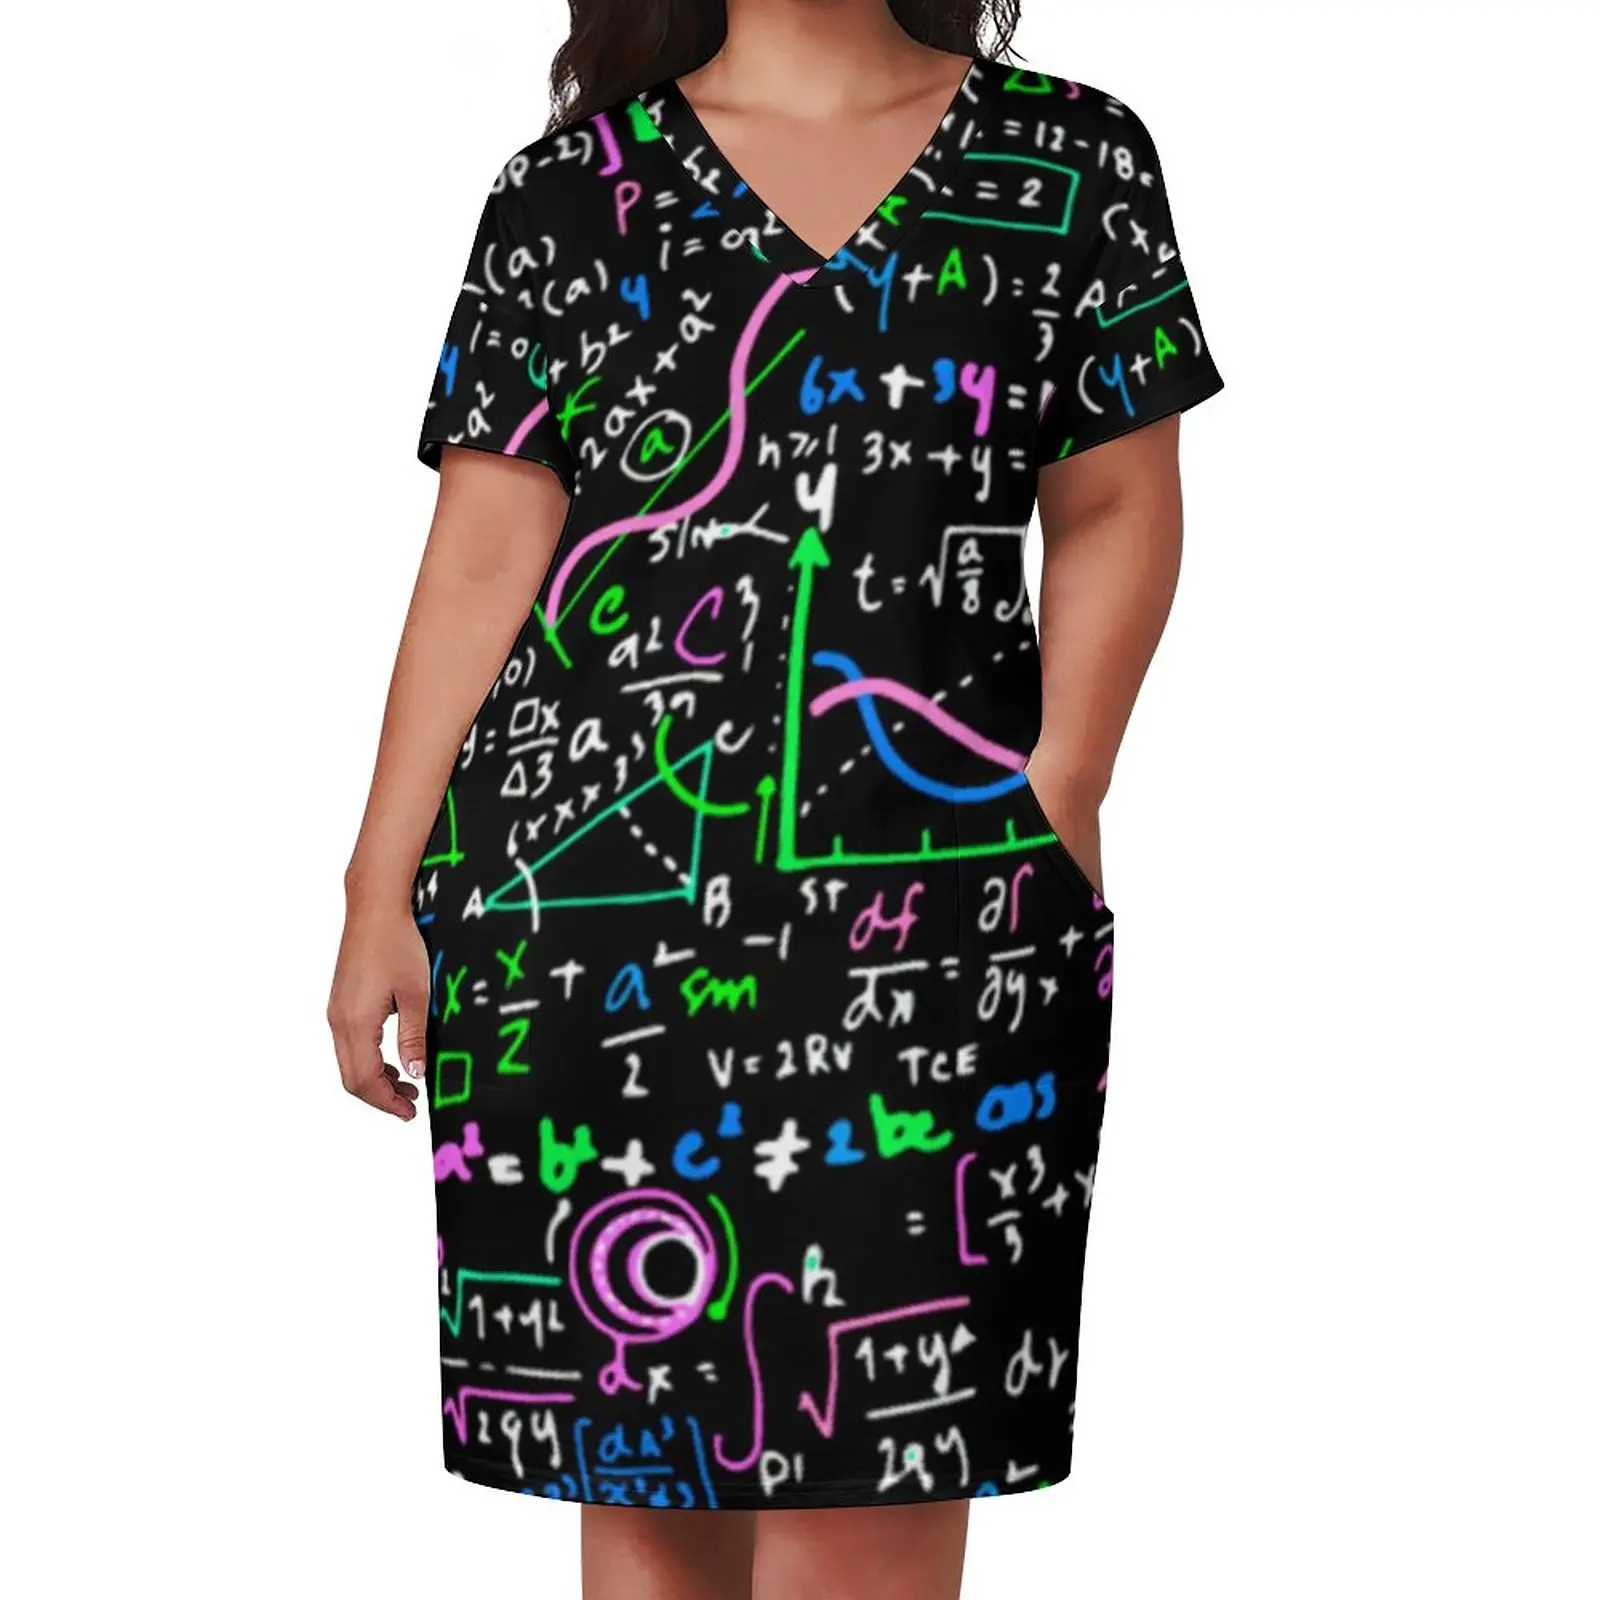 Math Linear Dress V Neck Mathematics Education Modern Dresses Female Aesthetic Graphic Casual Dress With Pockets Plus Size